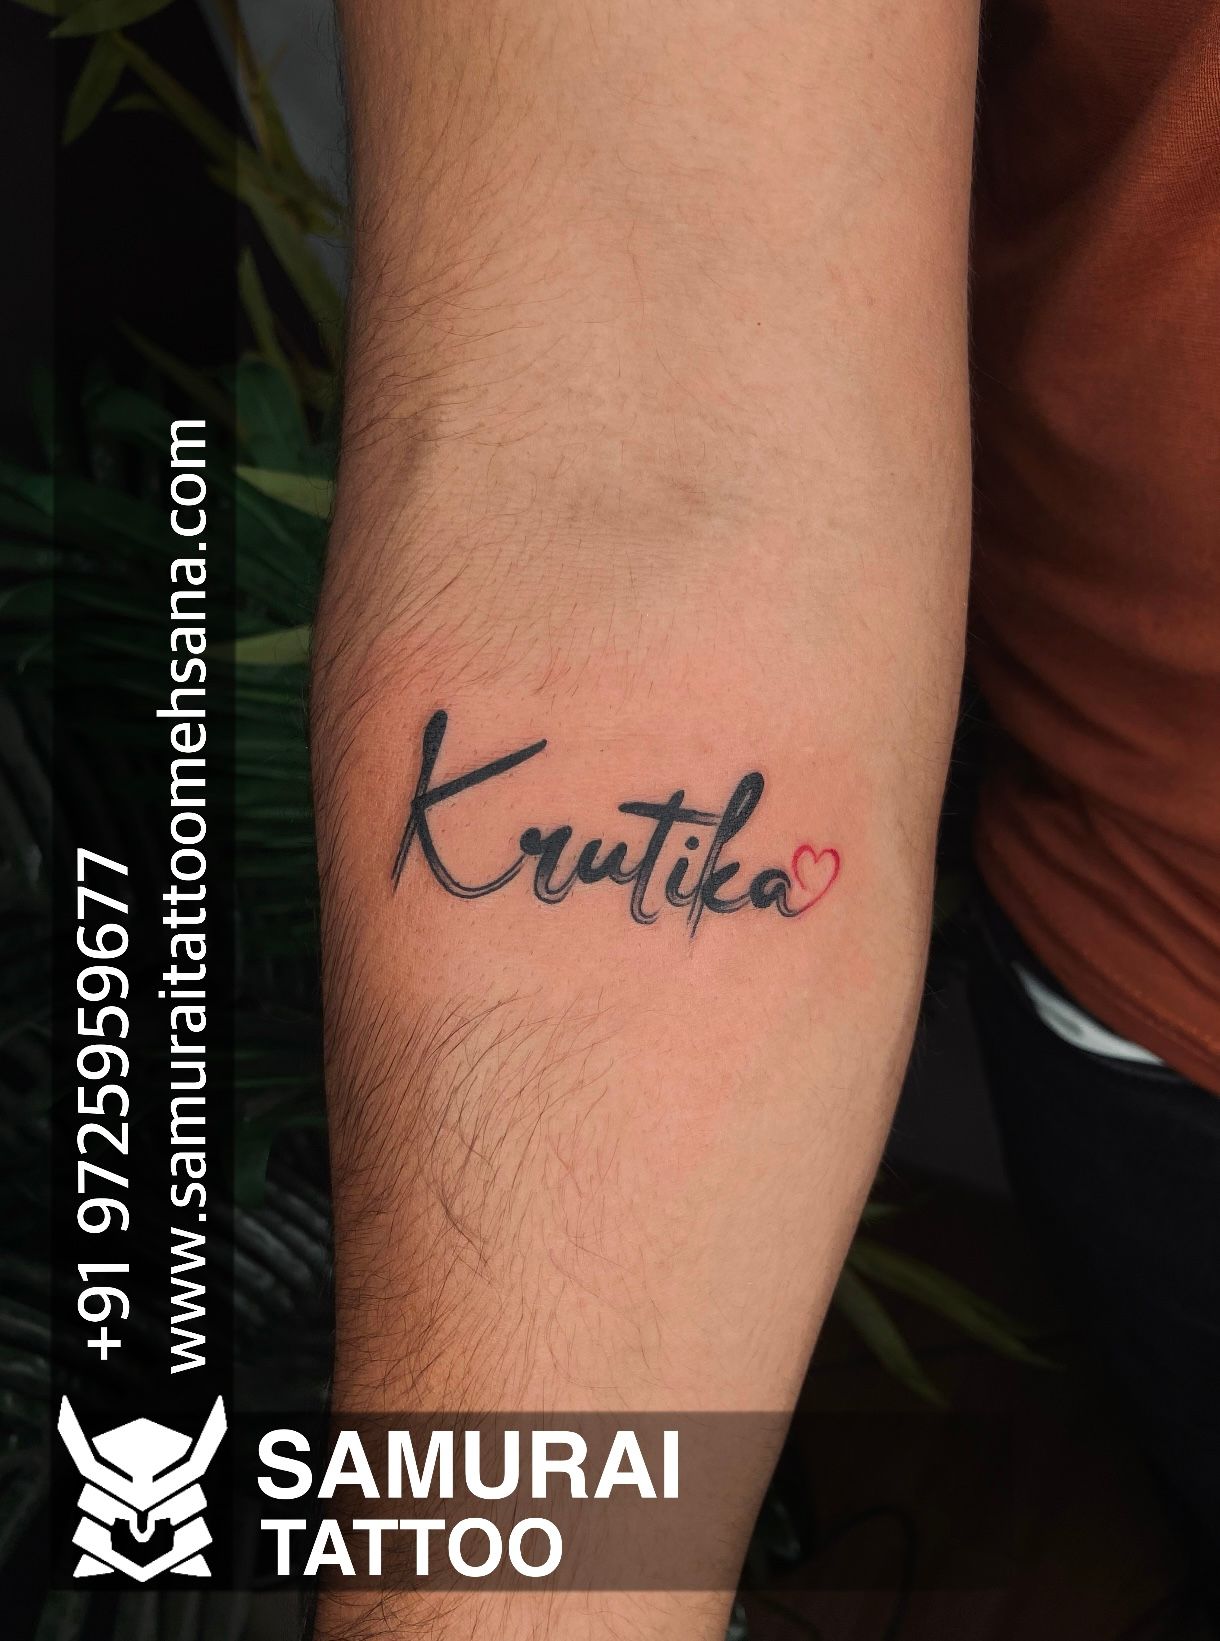 Trouvaille Tattooz  name tattoo customised krishna feather reals  instagram trouvailletattooz newdelhiindia shalimarbagh indian artist  8010519151 coverupspecialist Book your appointment with us for such  design 8010519151  Facebook